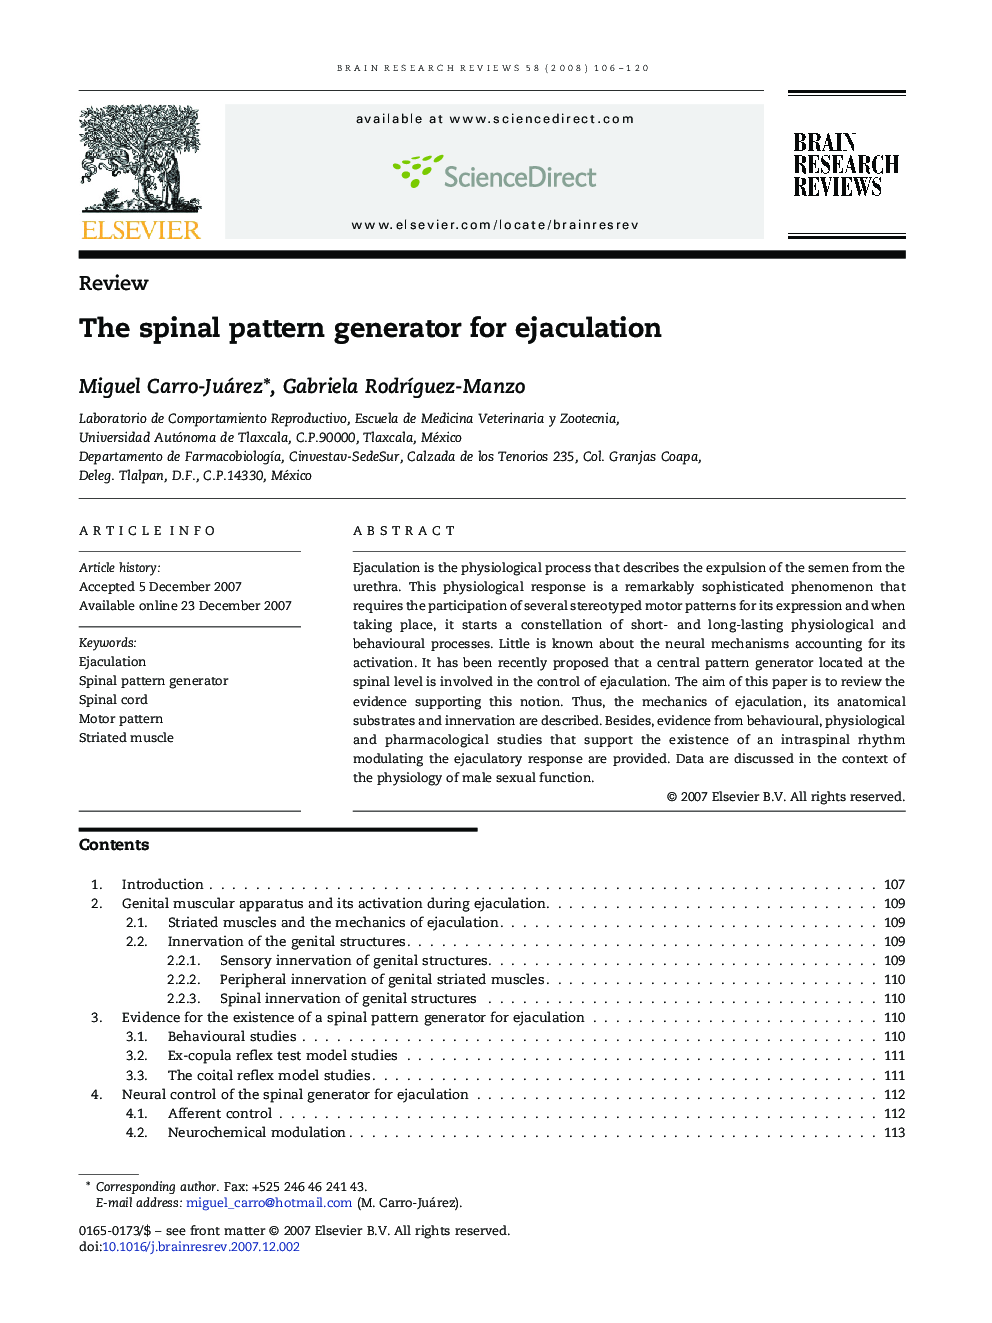 The spinal pattern generator for ejaculation